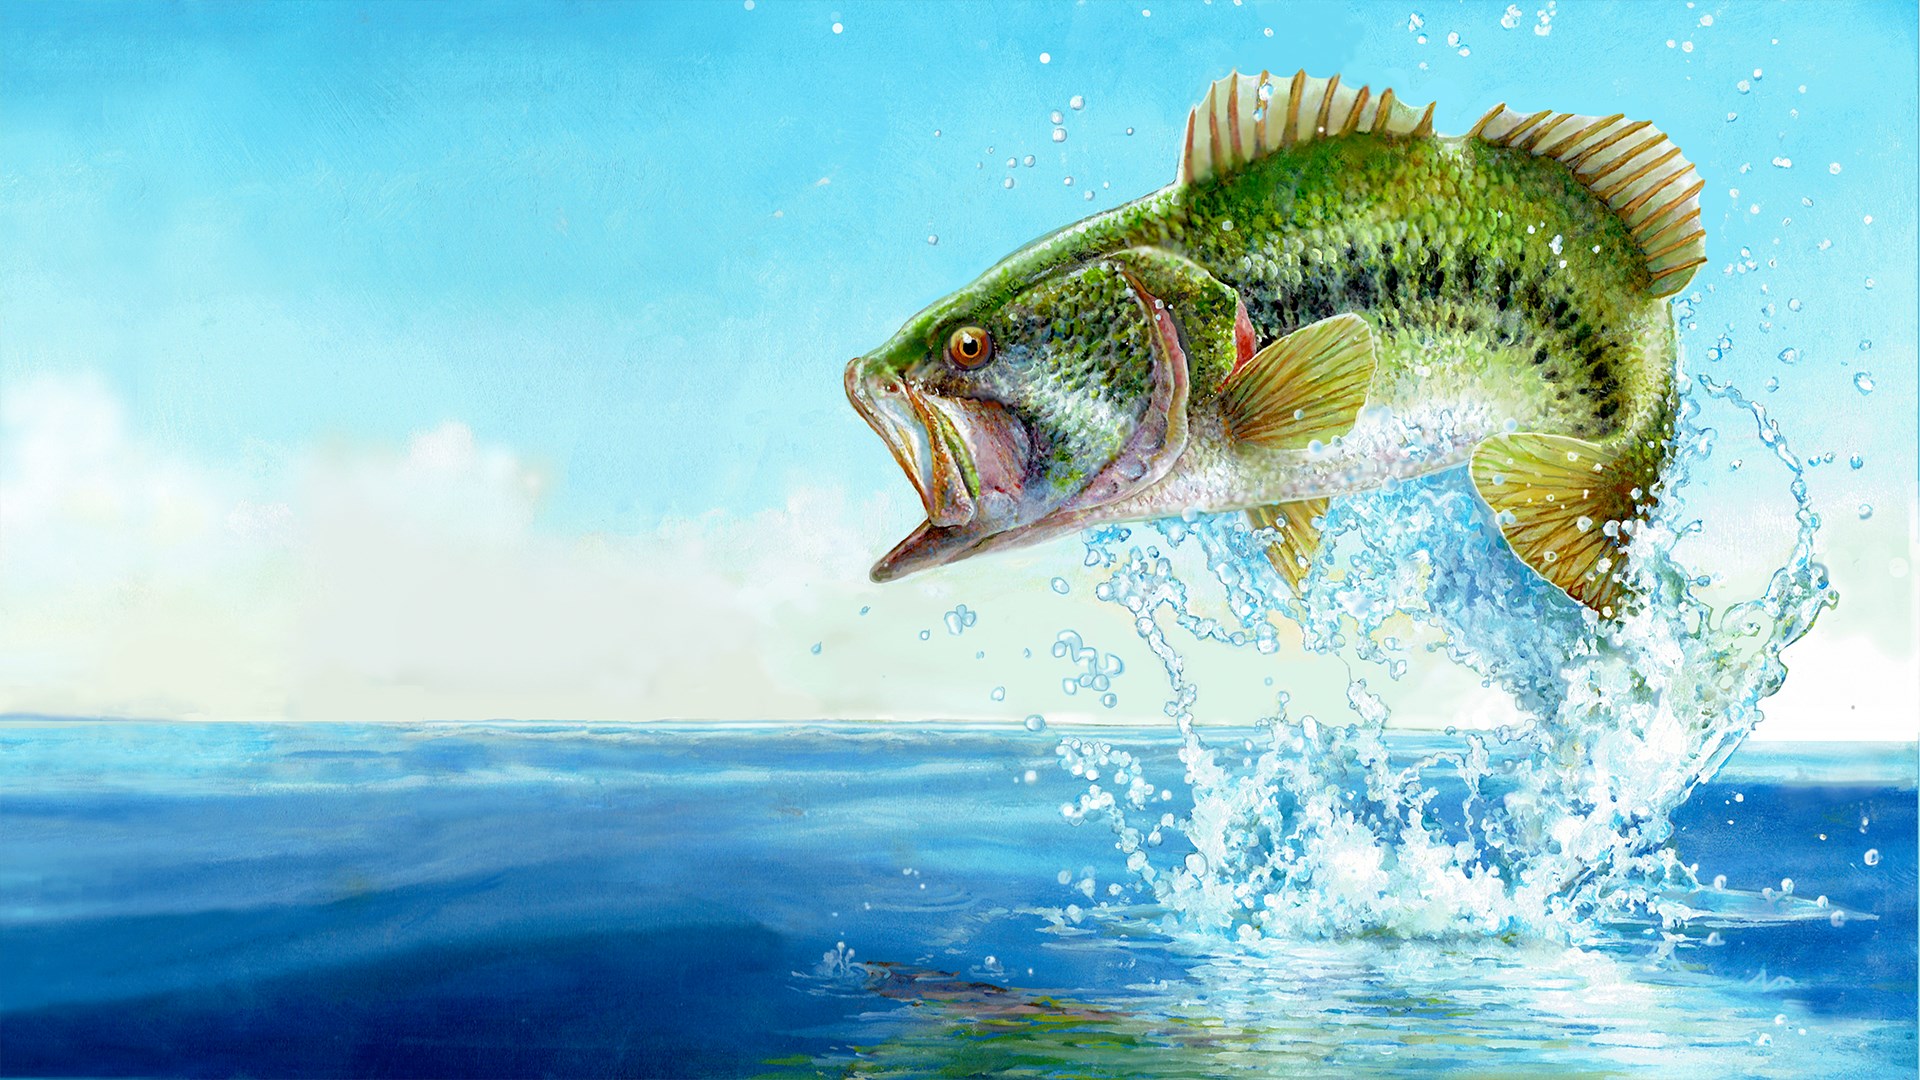 Fishing Sim World: Bass Pro Shops Edition Is Now Available For